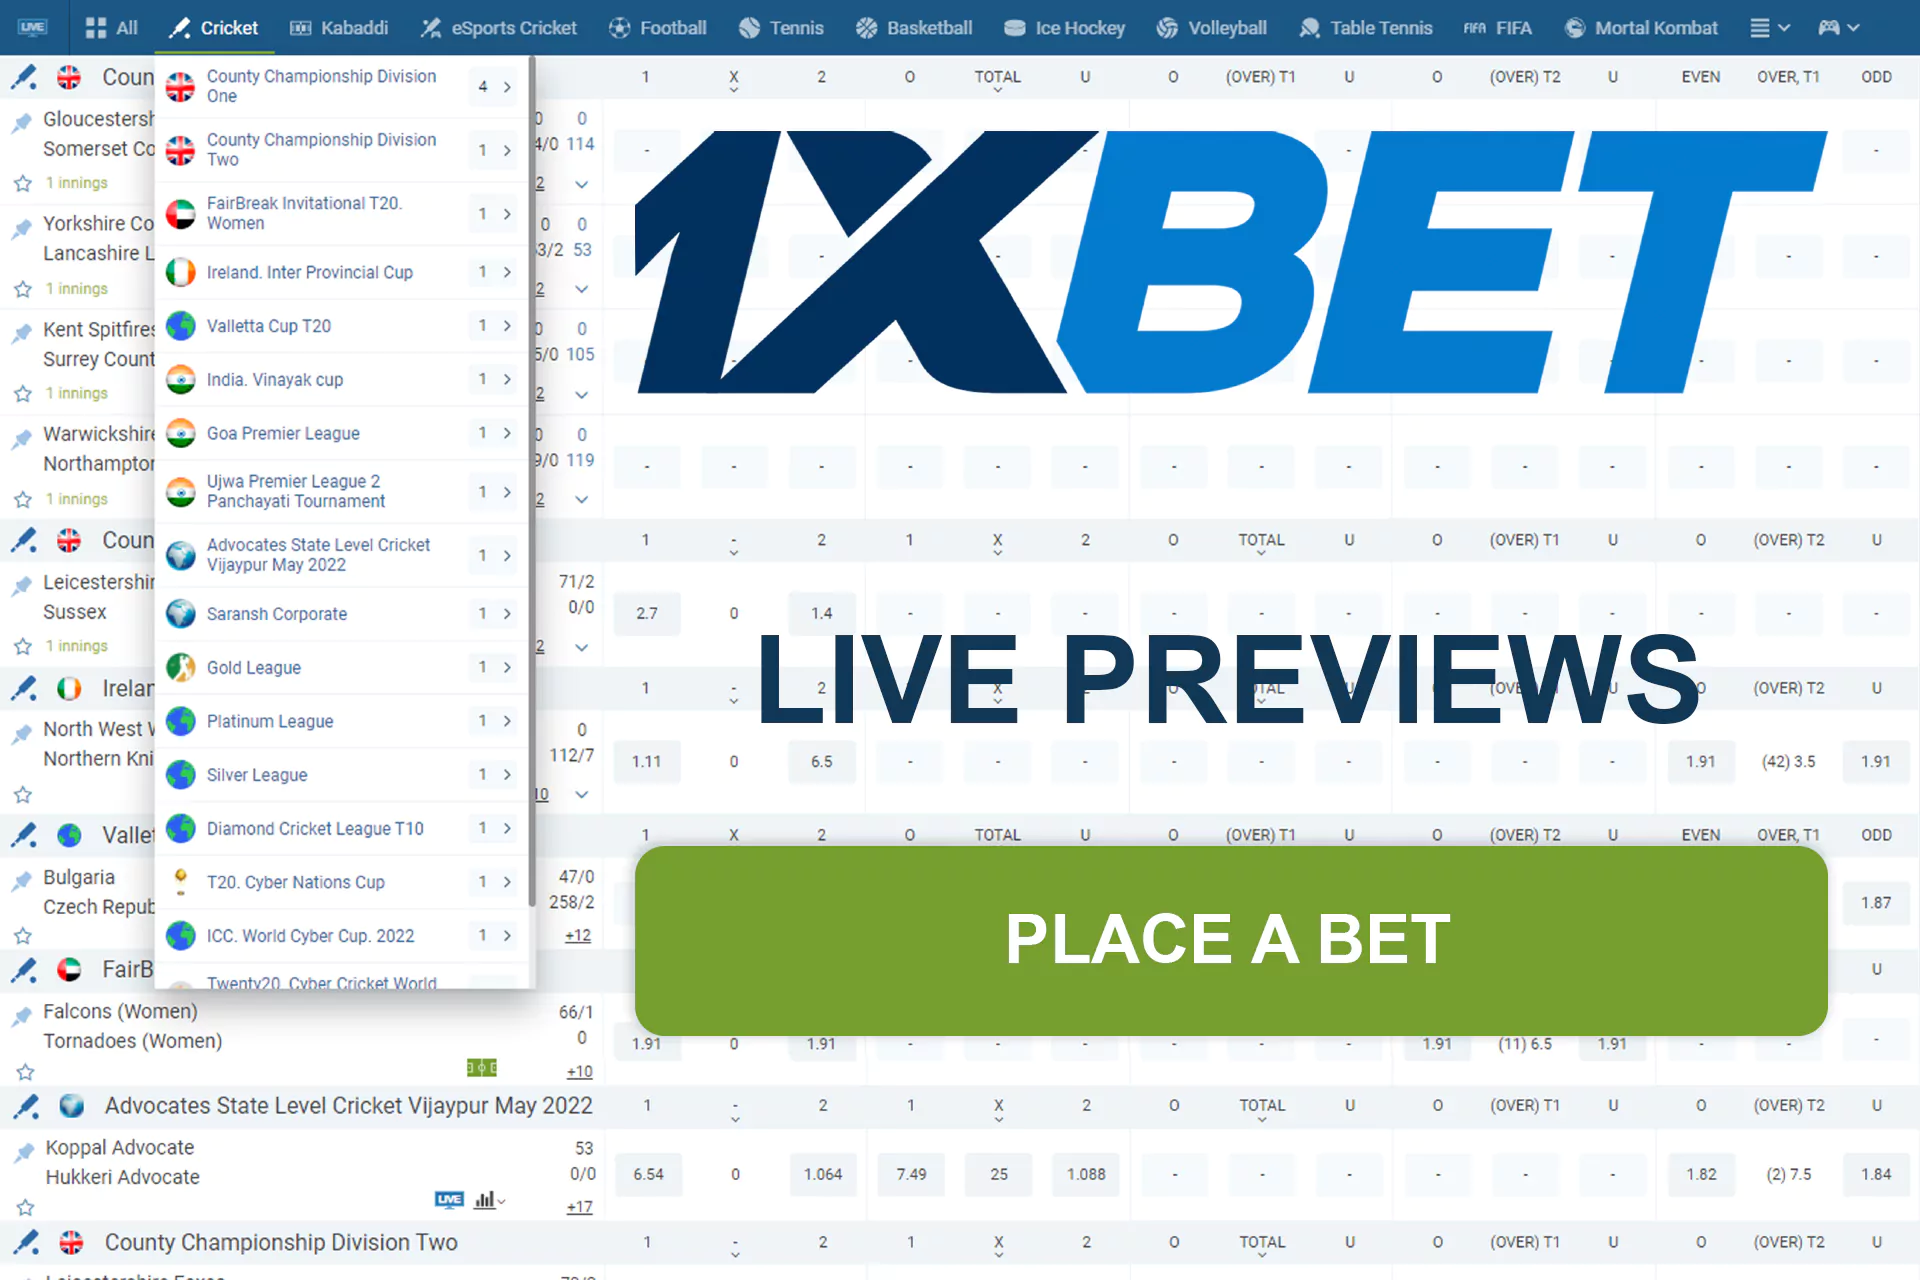 Bet in Live Previews on the official 1xBet website in Bangladesh.